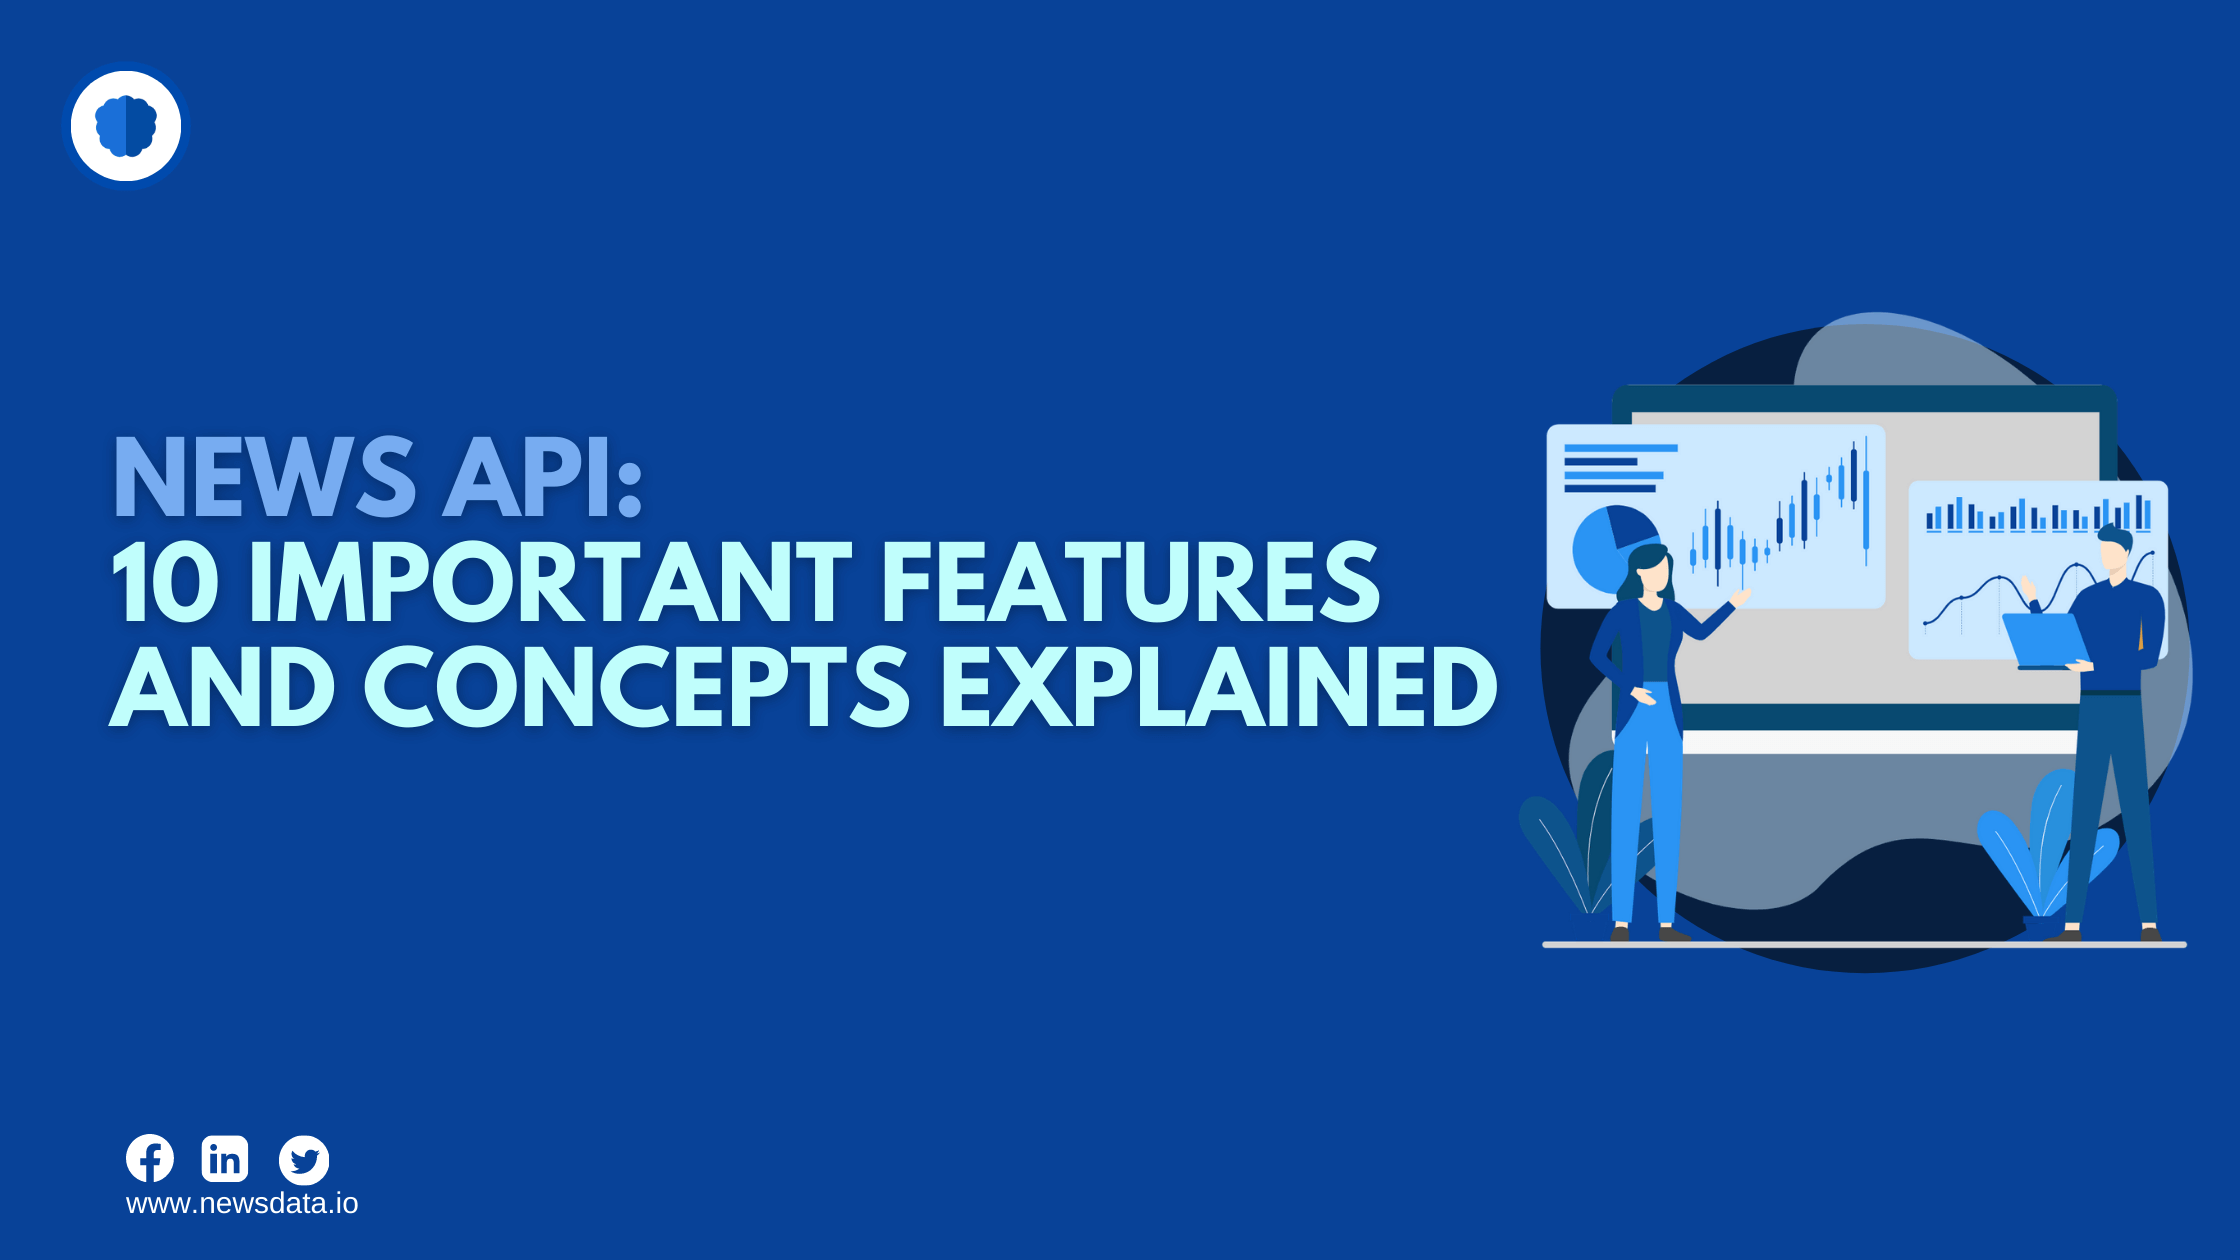 News API: 10 important features and concepts explained